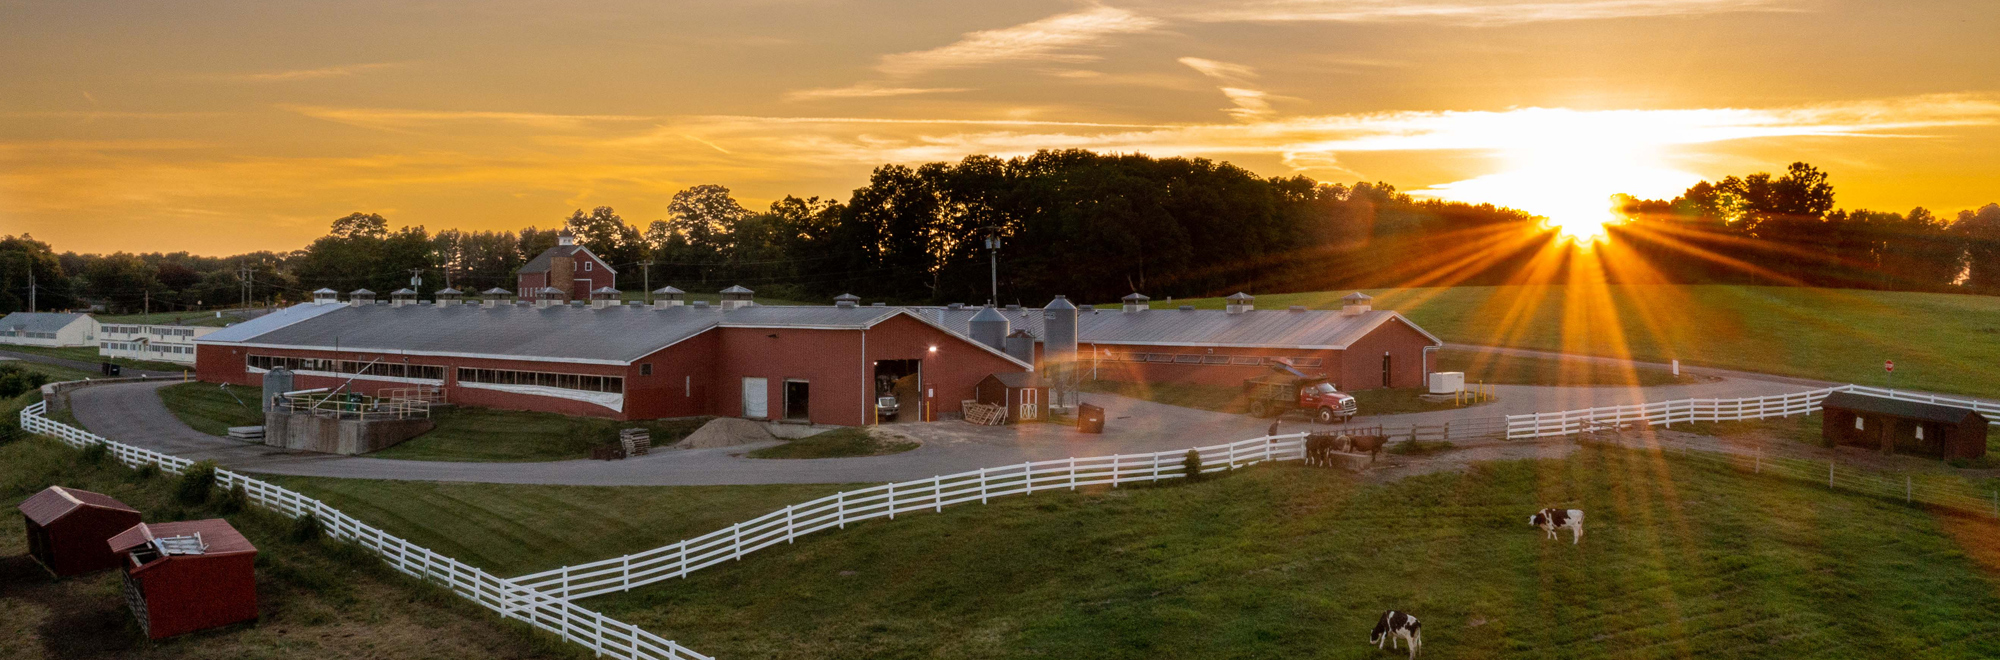 banner - Dairy Center at sunset